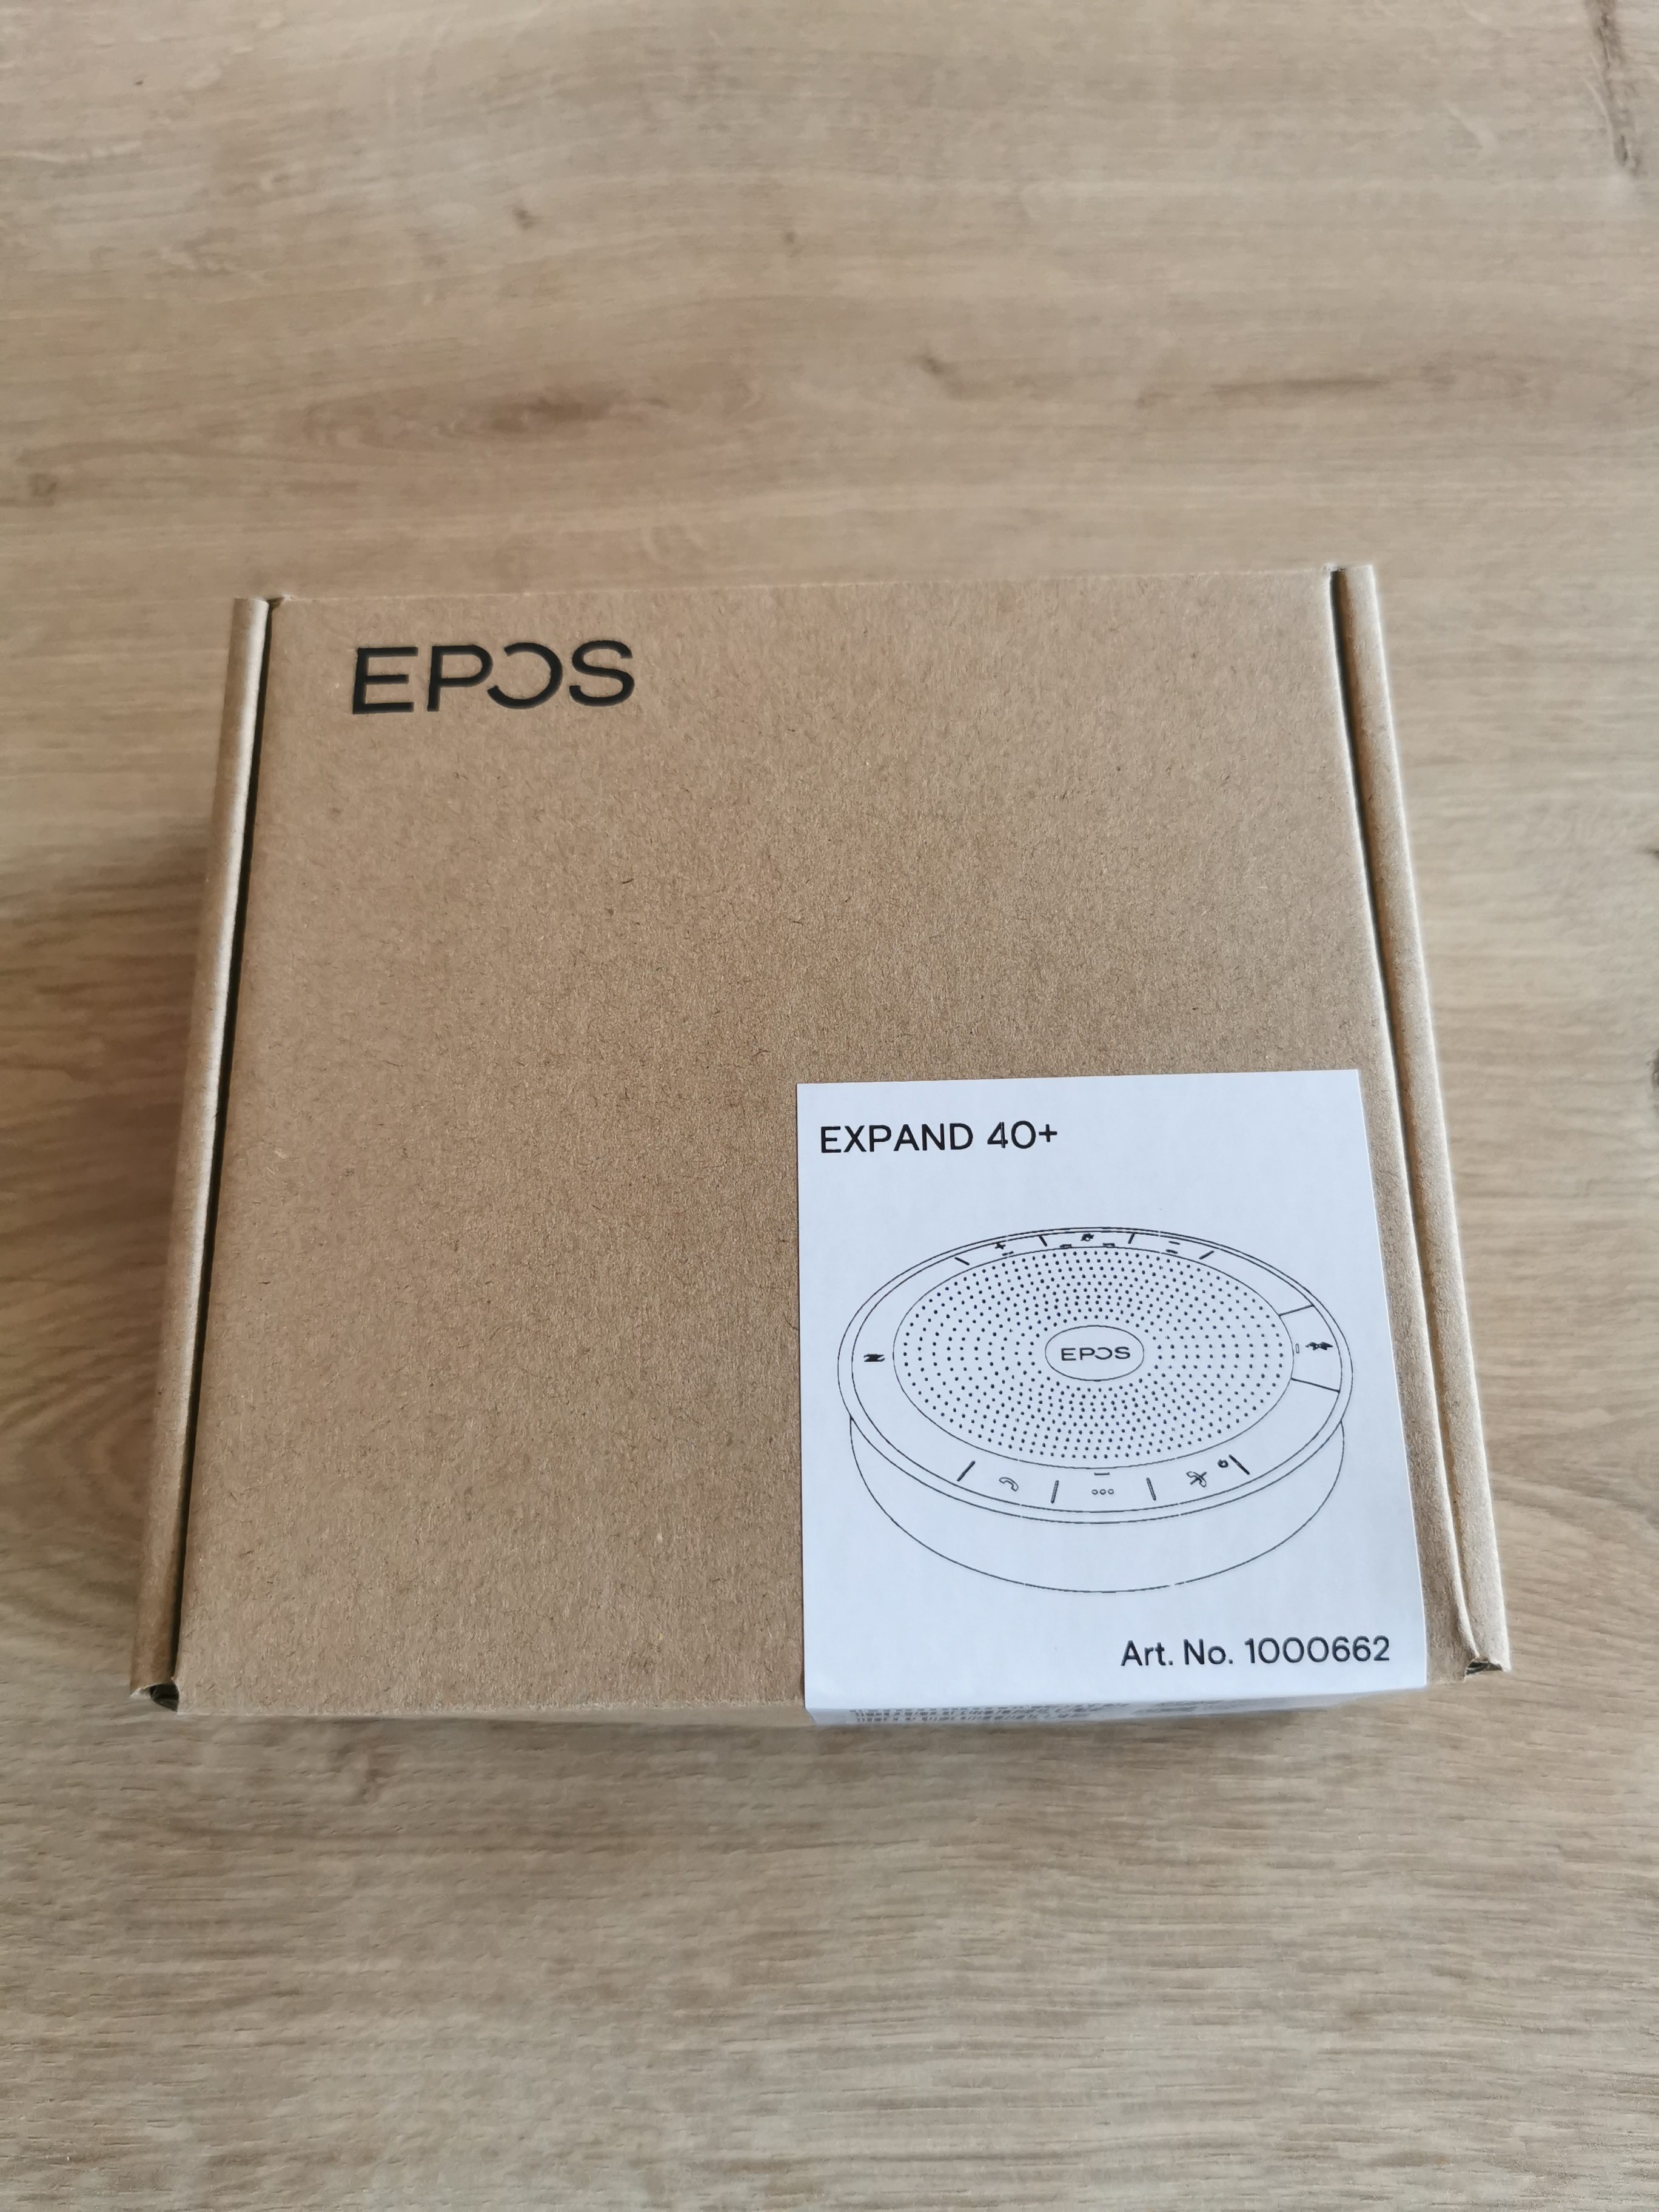 Verpackung des EPOS EXPAND 40+